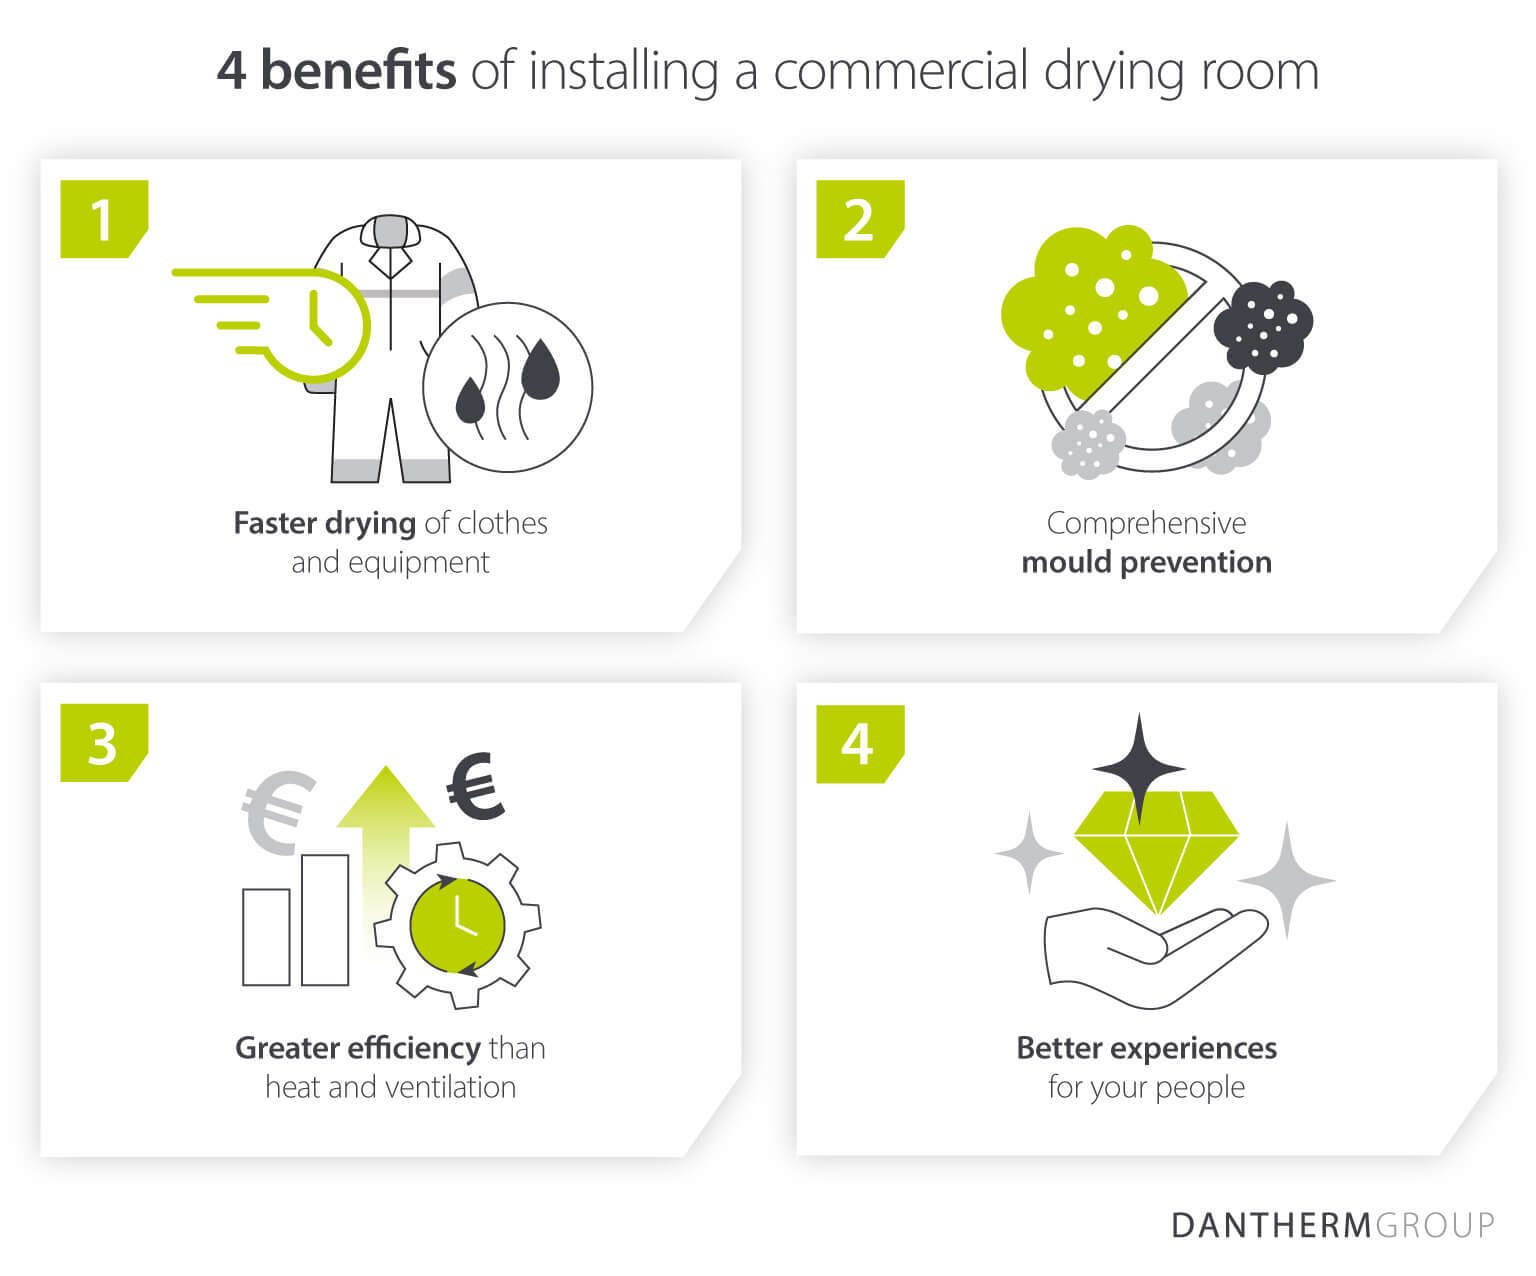 4 benefits of installing a commercial drying room